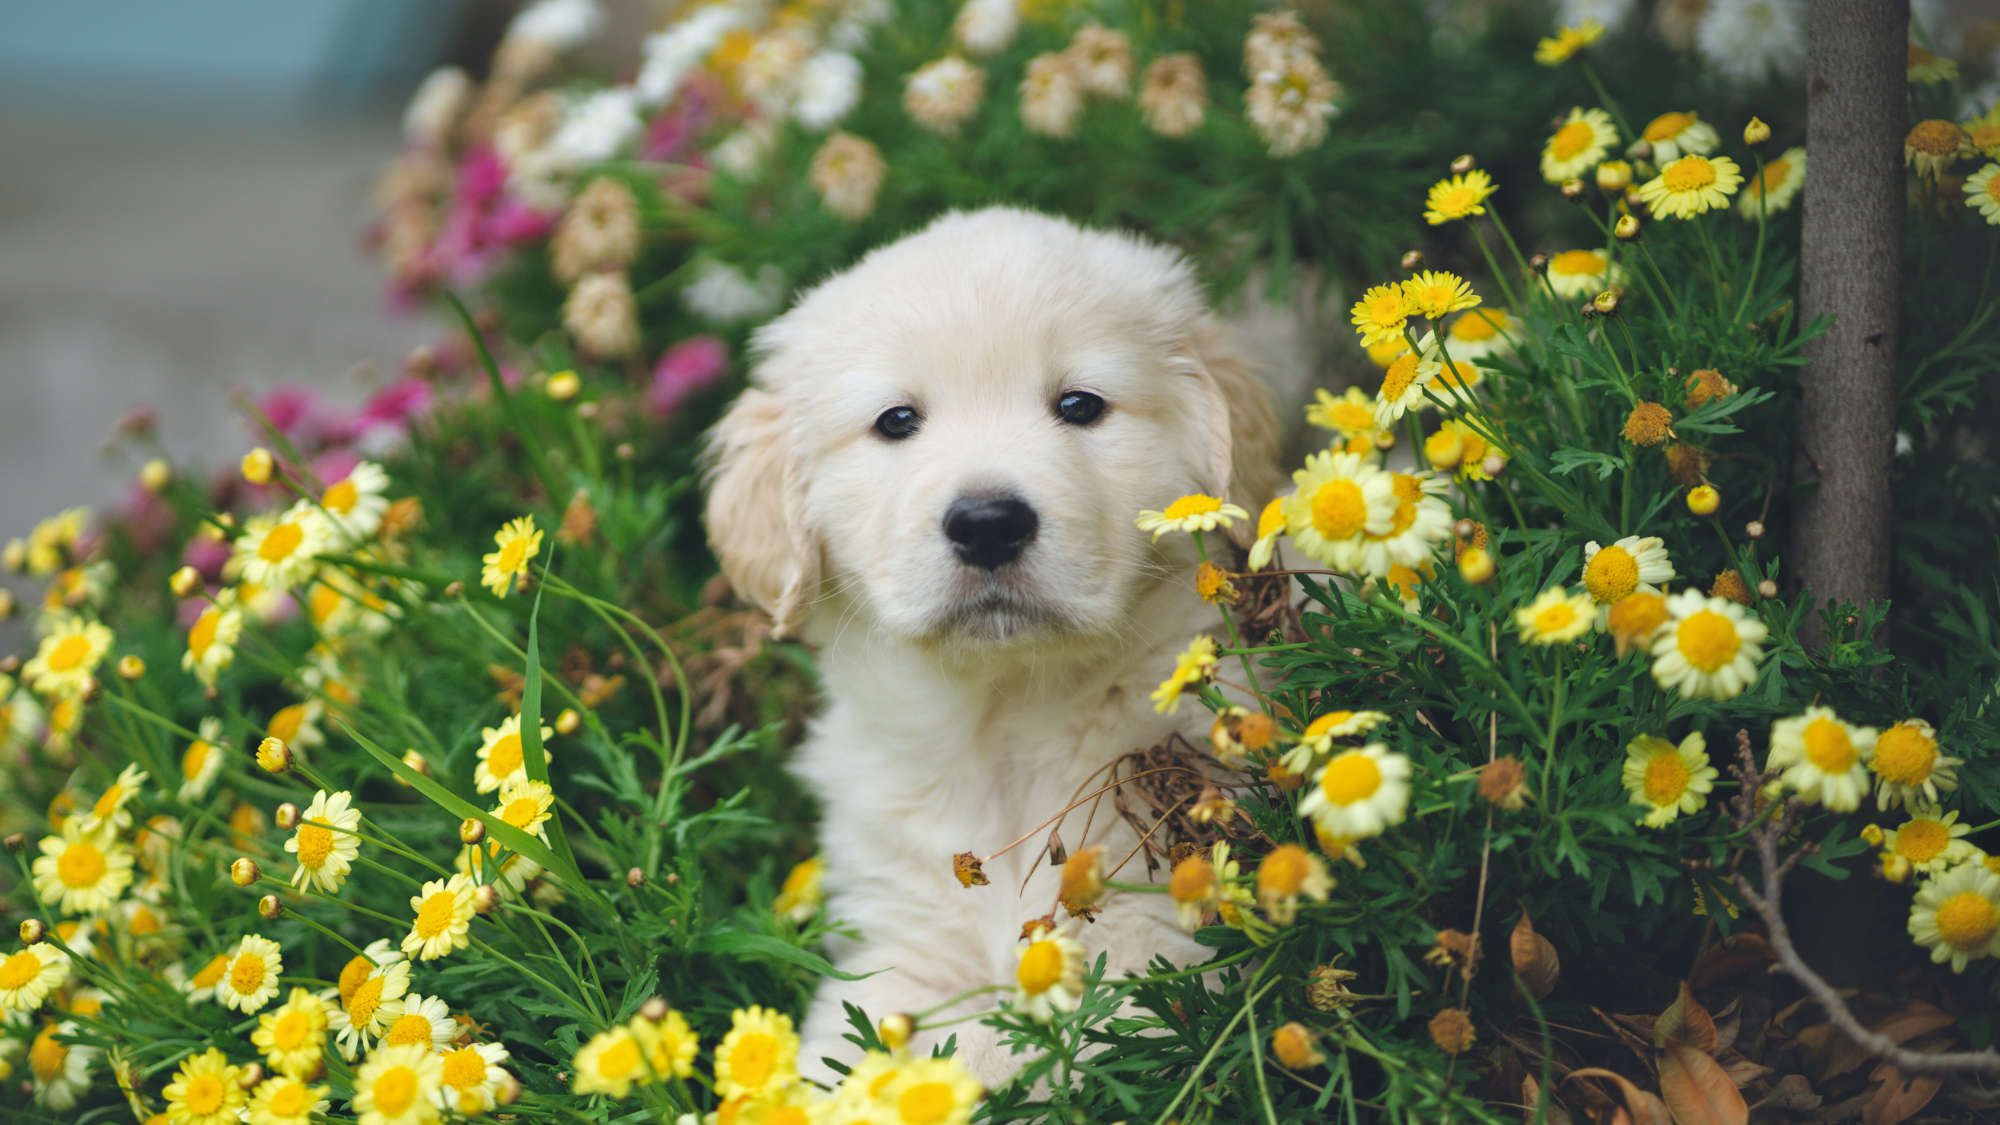 Puppy surrounded by flowers